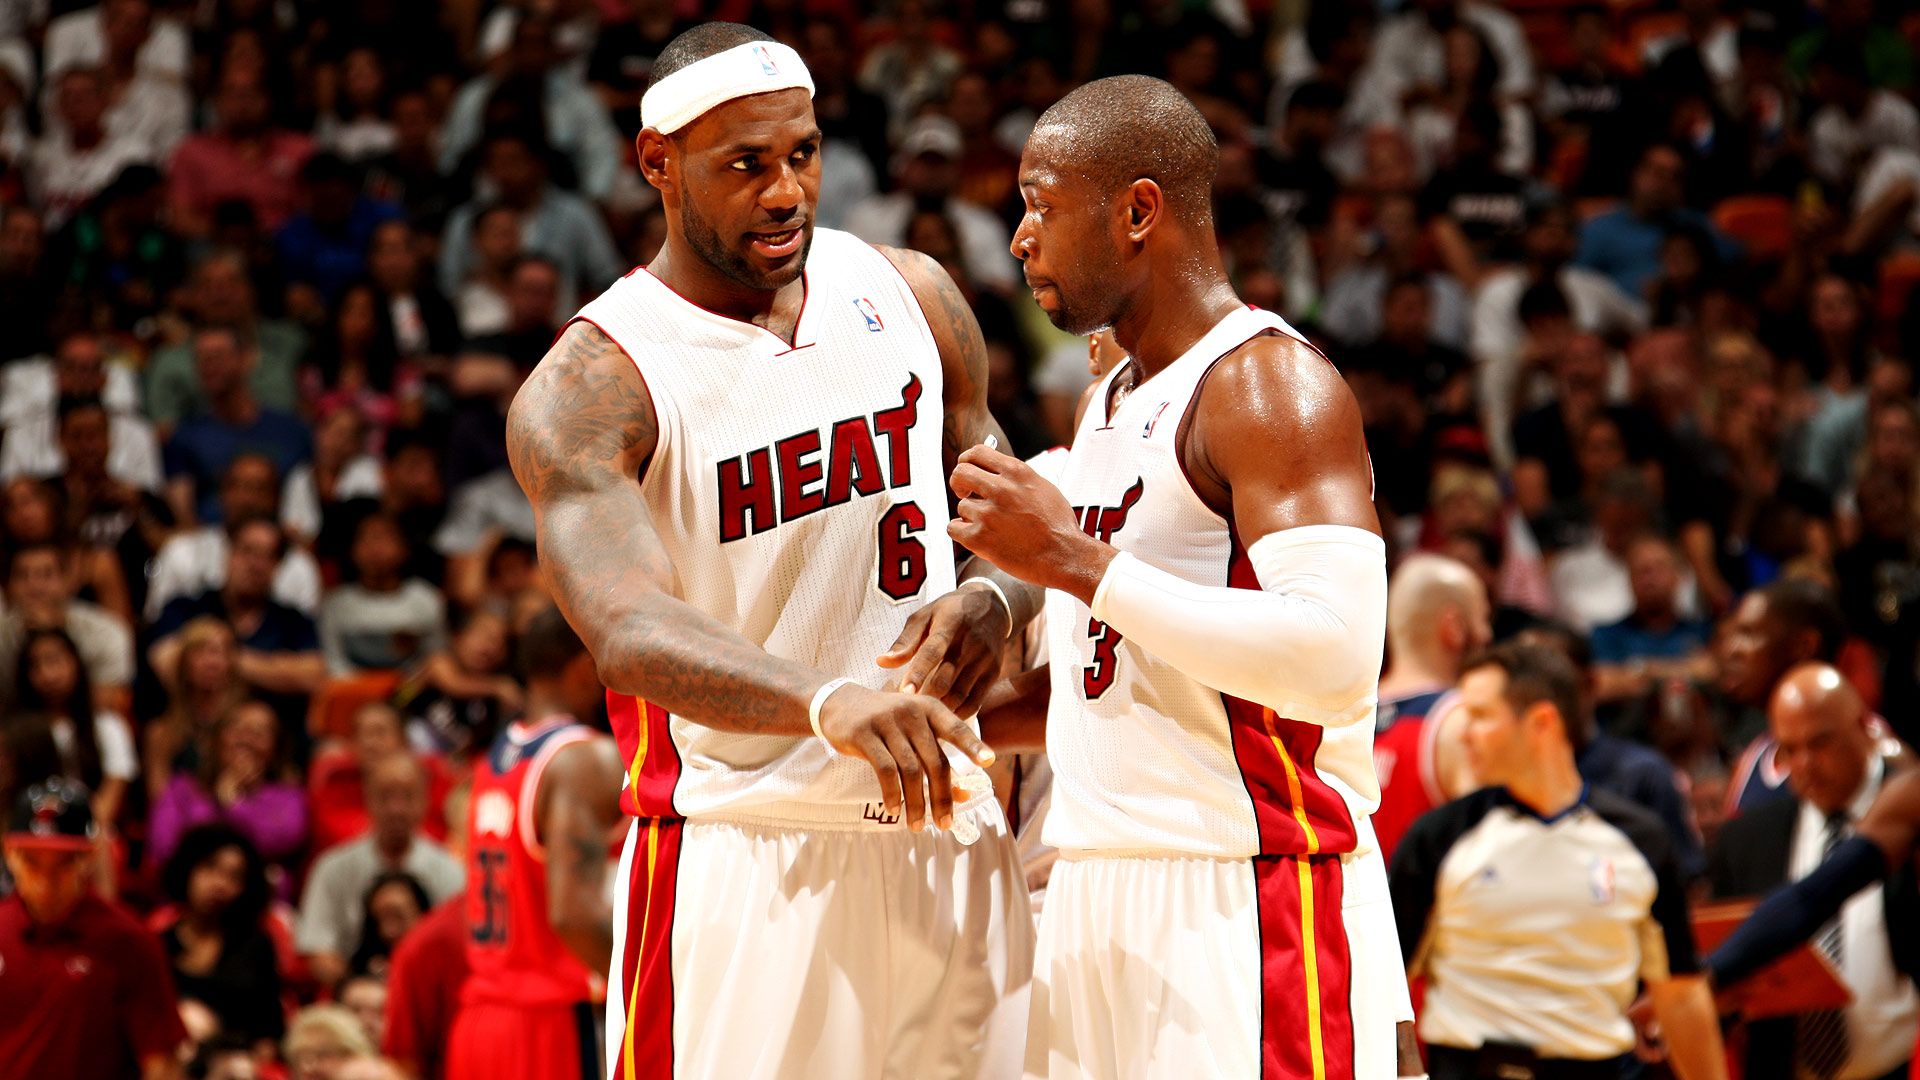 LeBron James says he can't envision leaving Miami Heat right now